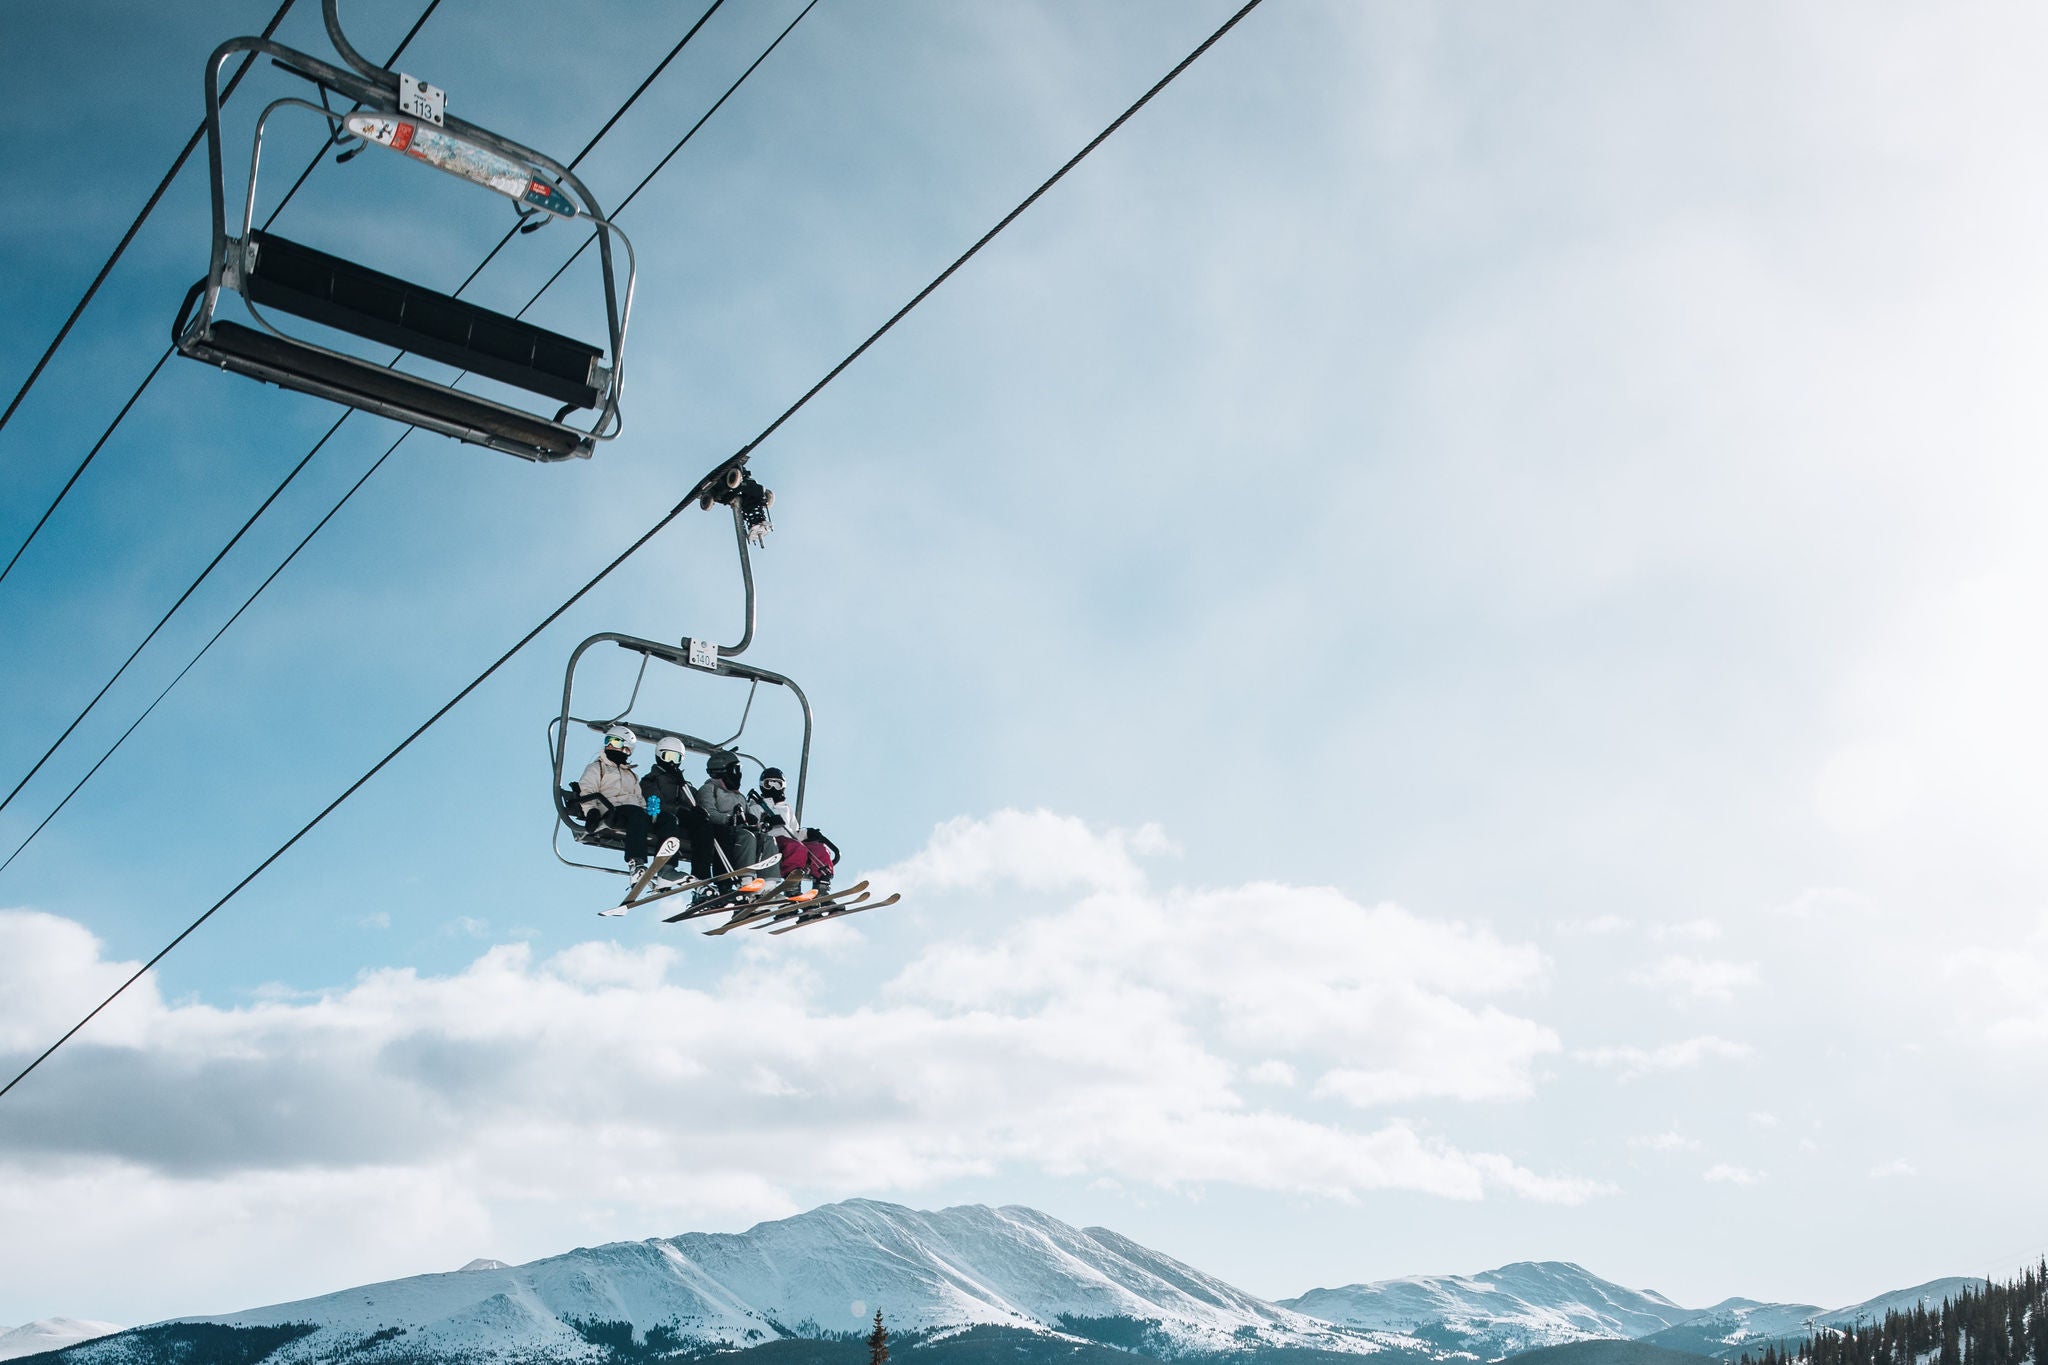 ENJOY MORE TIME ON THE SLOPES WHEN YOU PURCHASE TICKETS IN ADVANCE! [PHOTO CREDIT: ETHAN WALSWEER]